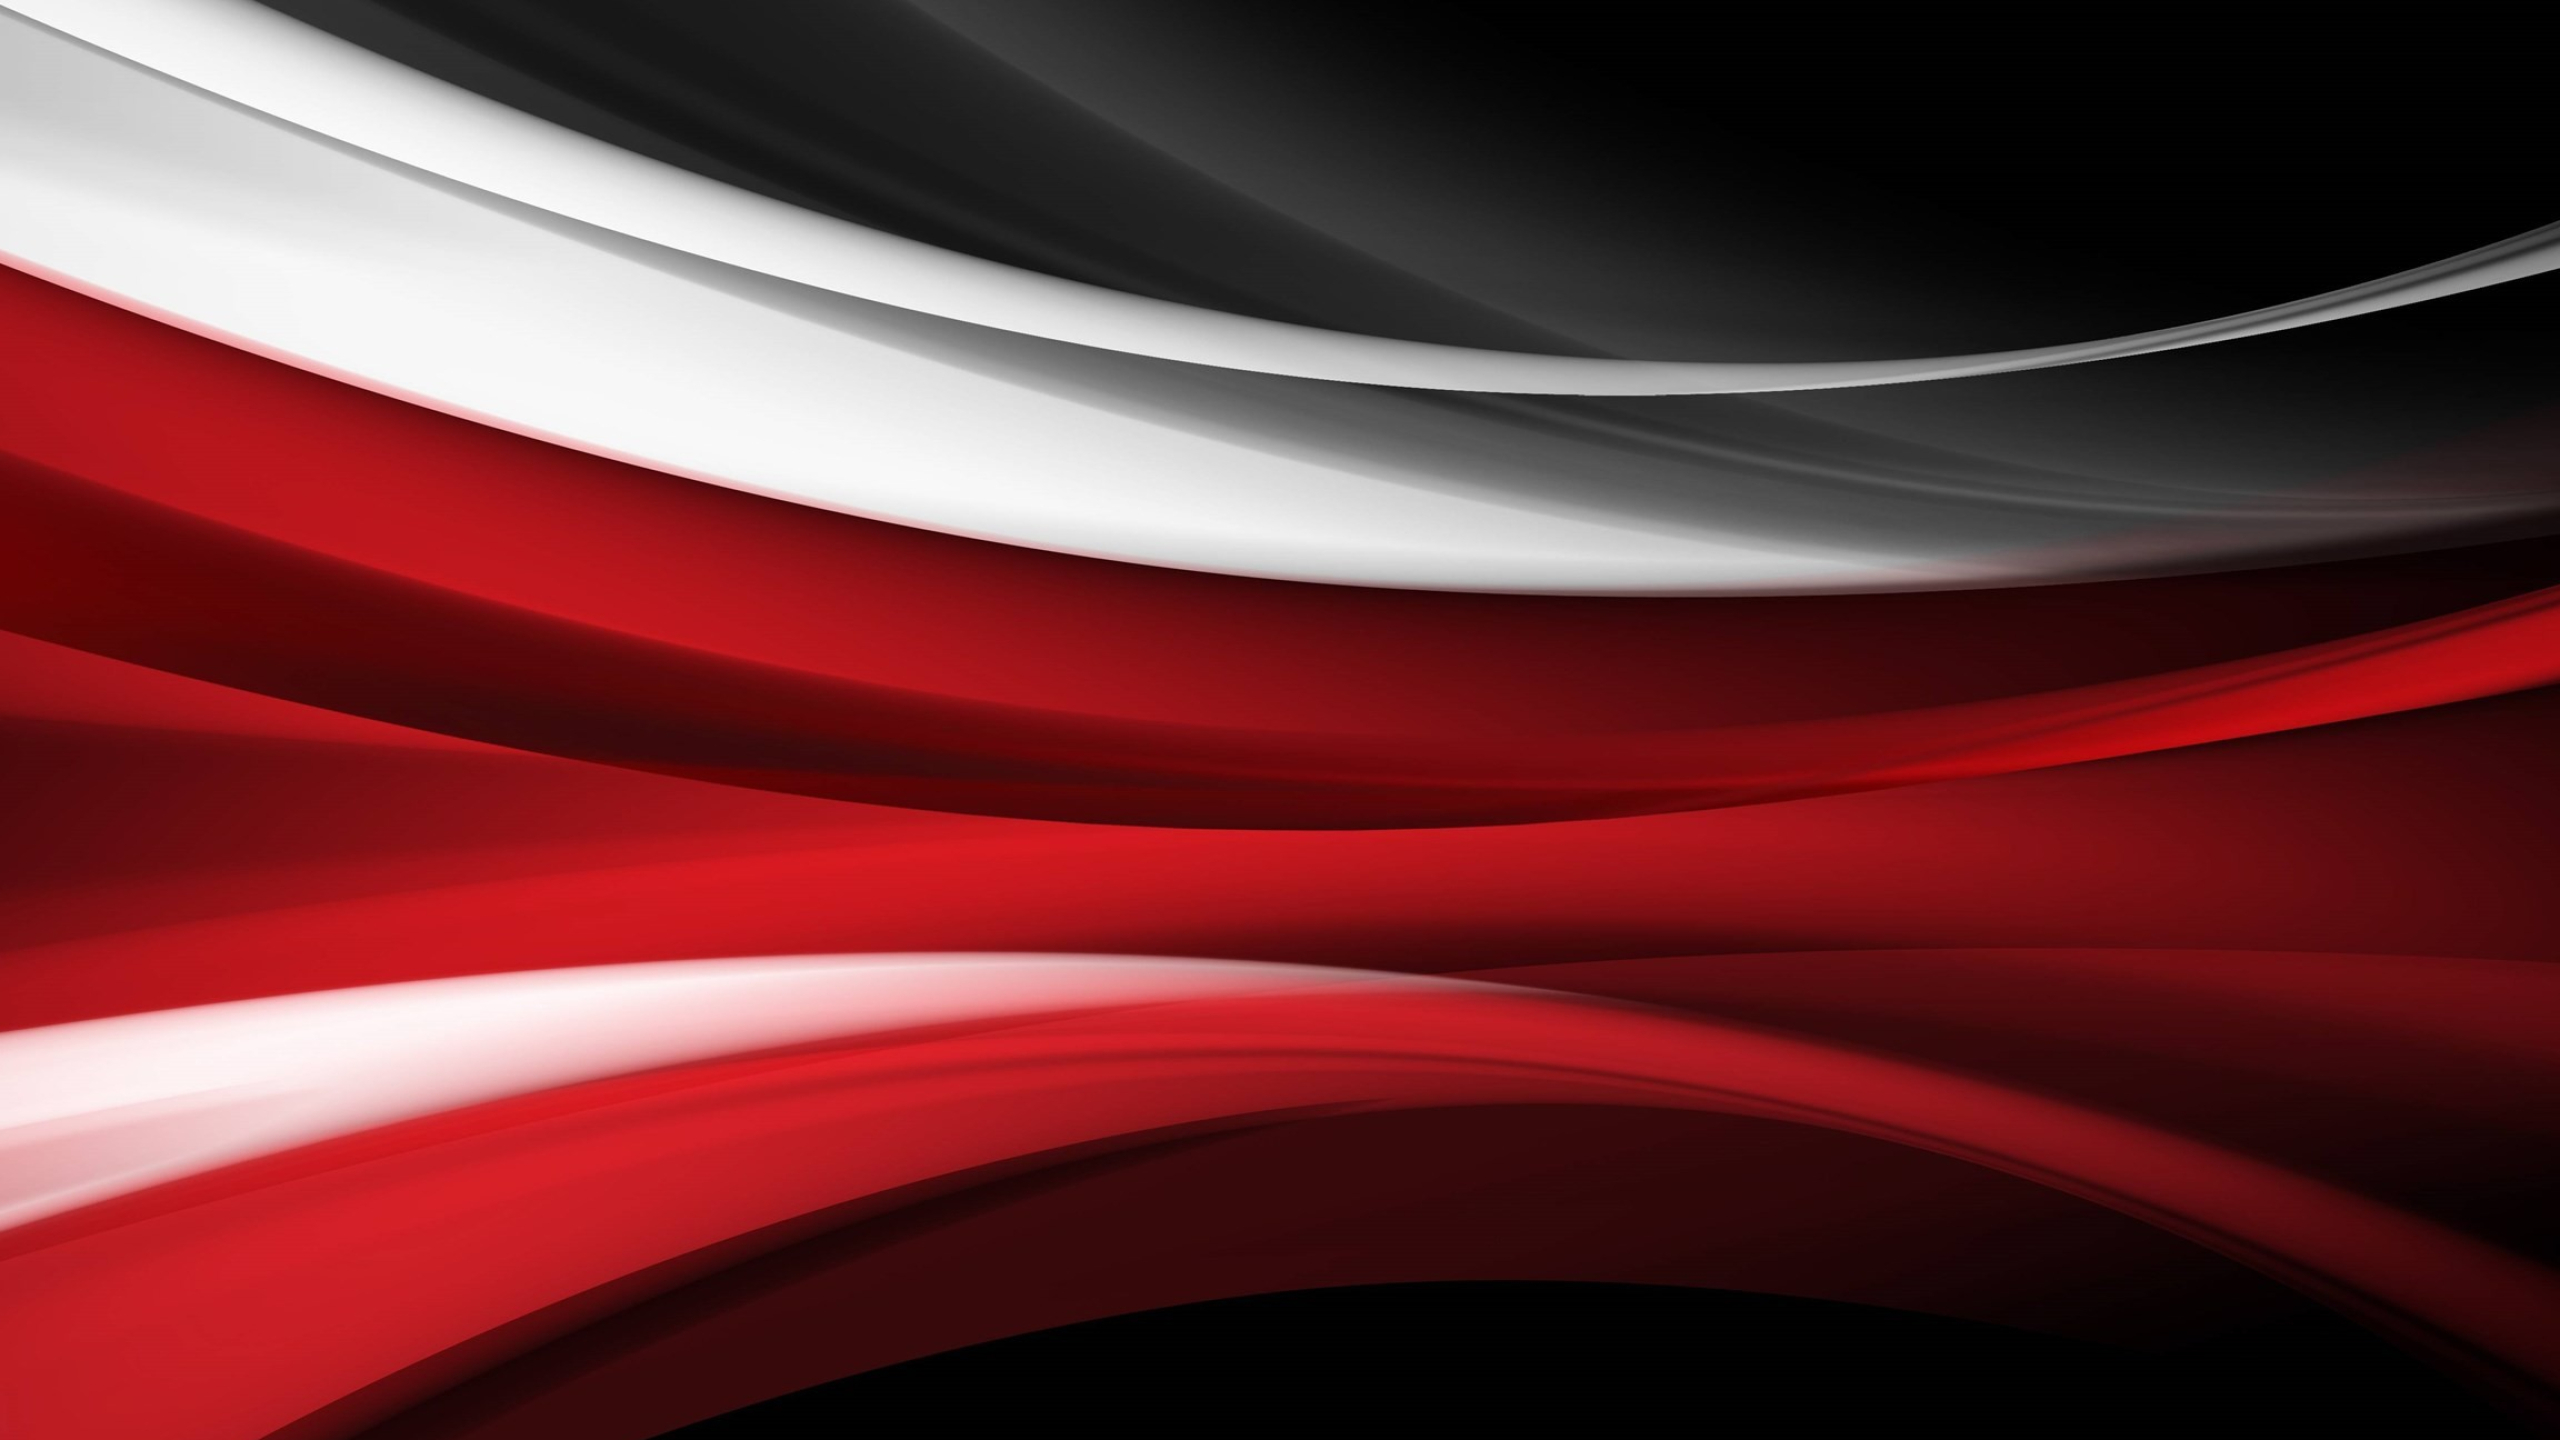 2560x1440 Red and Black Abstract Backgrounds (62+ pictures